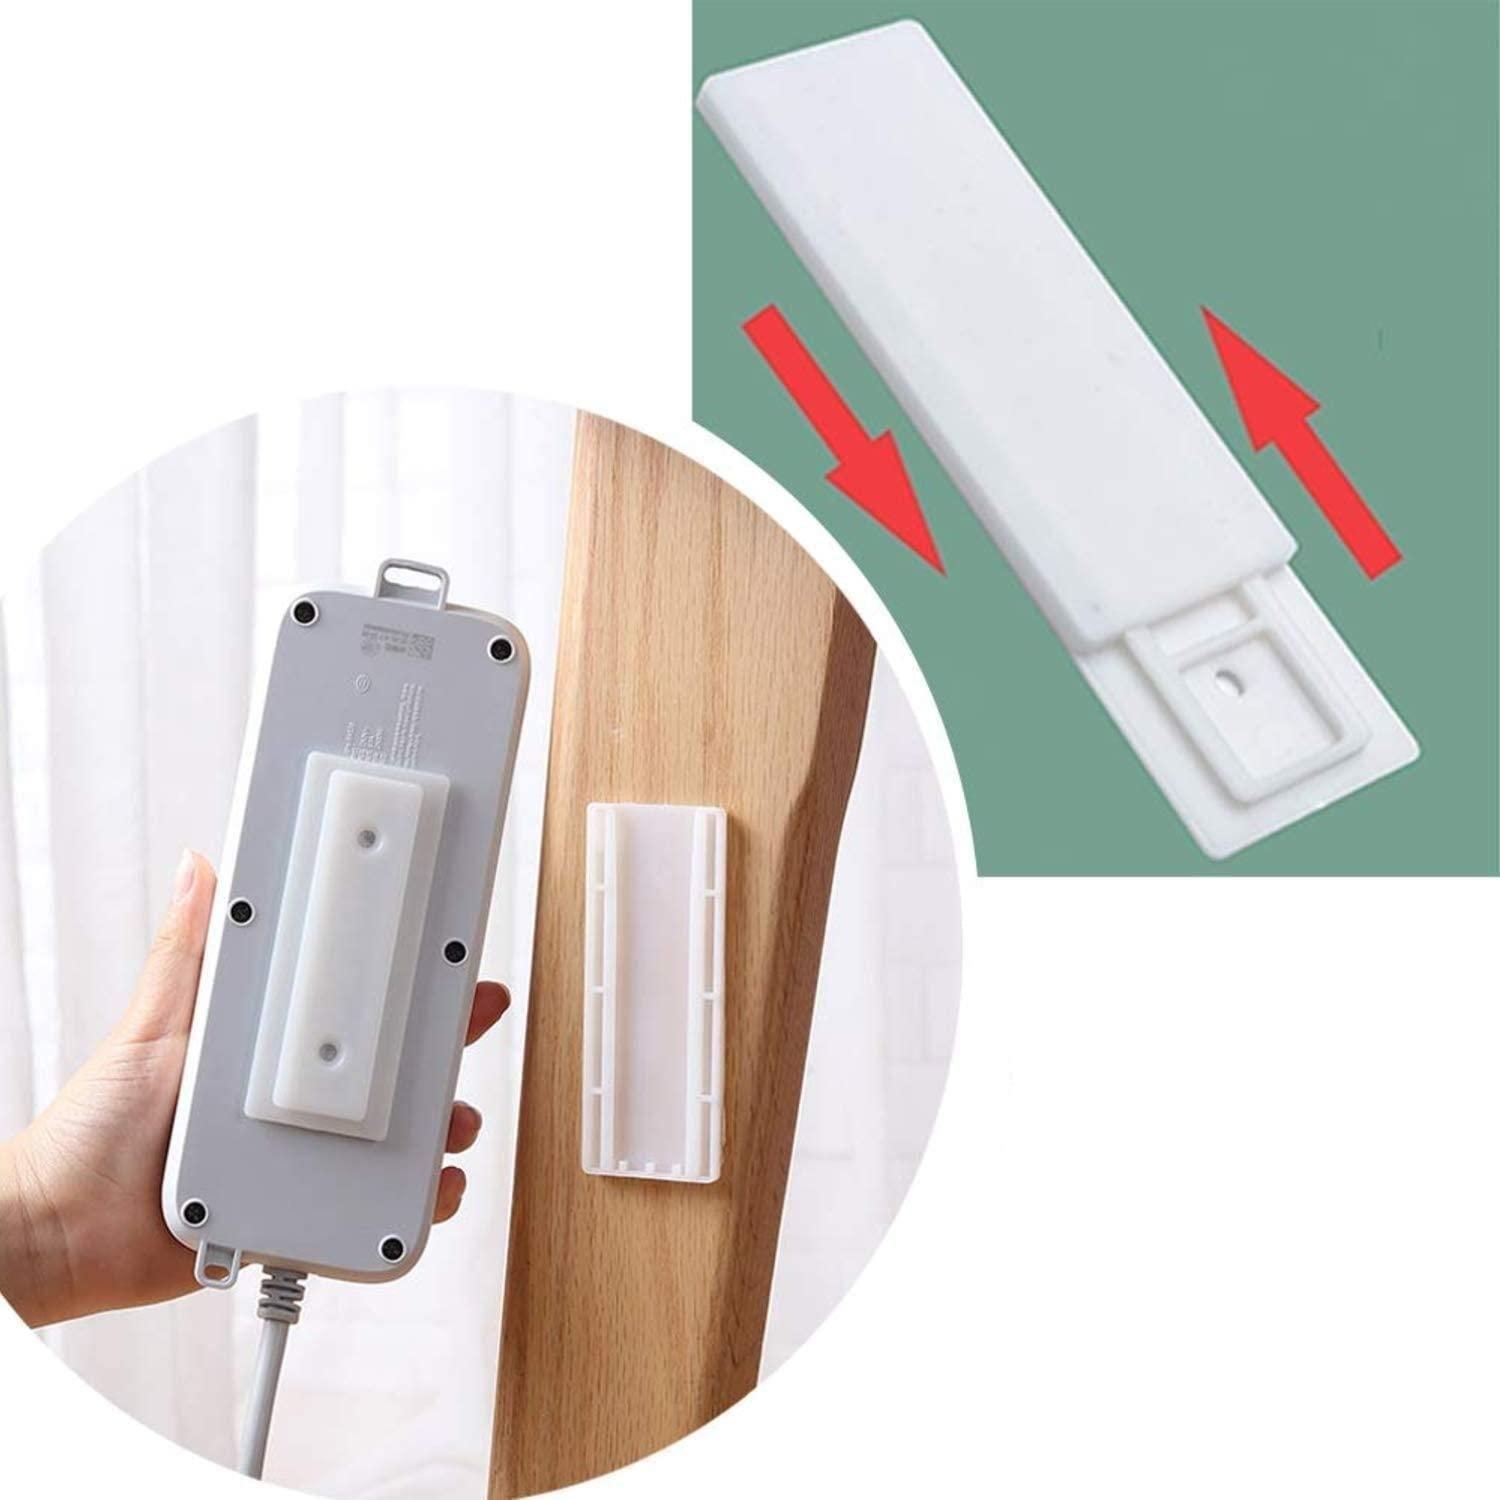 Self-Adhesive Plug Board Wall Patch Panel Wall Mount Cable Organiser